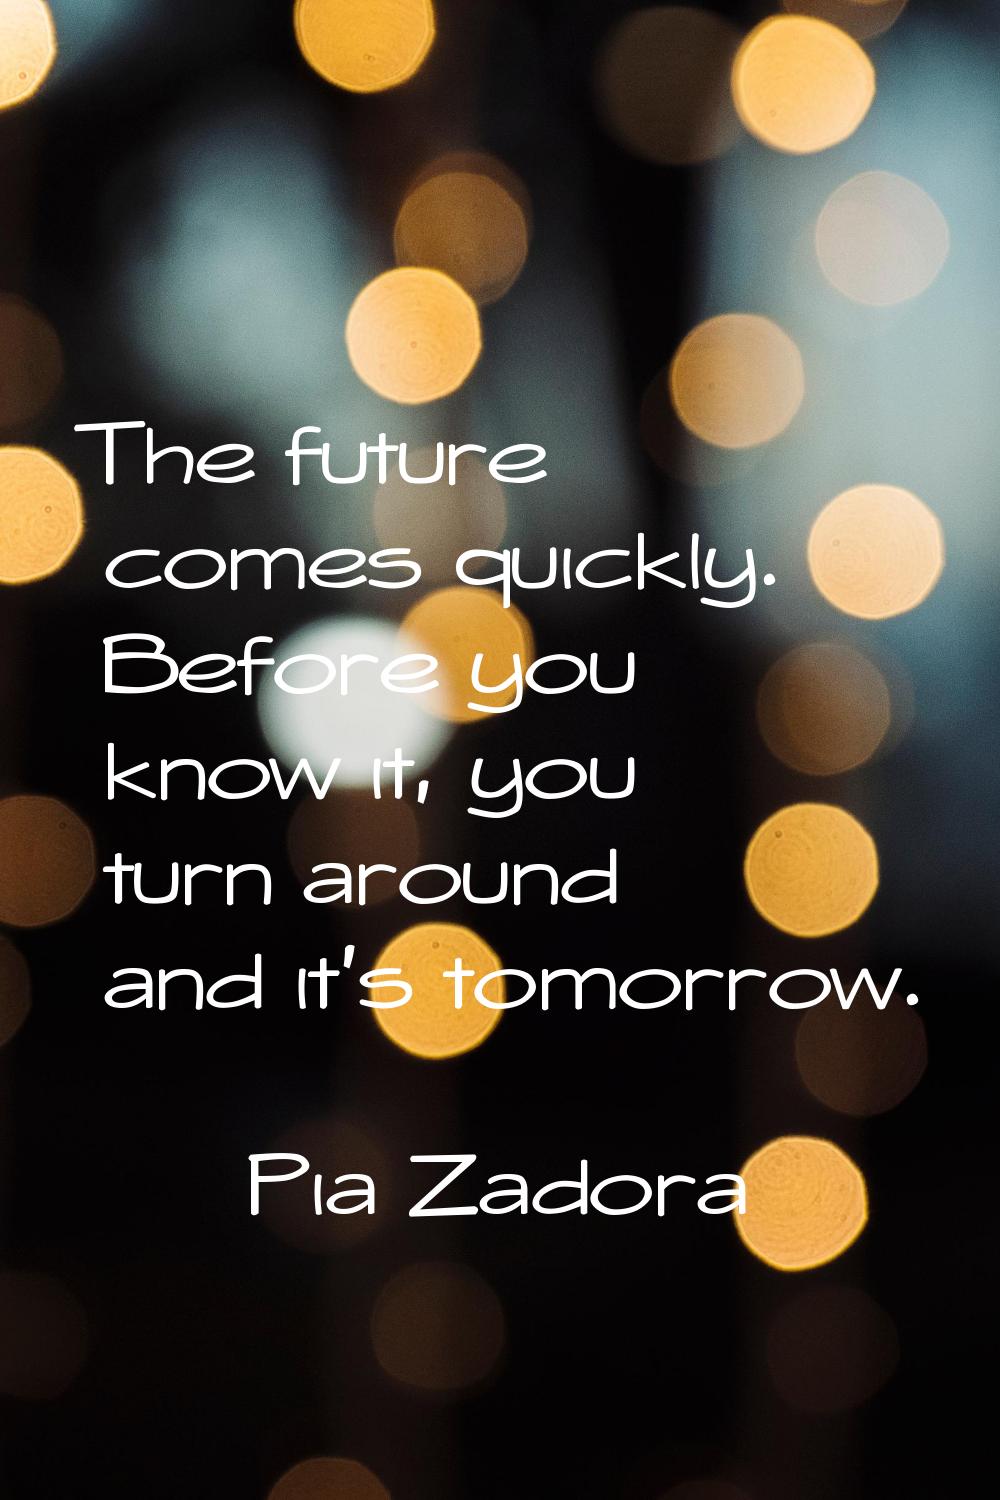 The future comes quickly. Before you know it, you turn around and it's tomorrow.